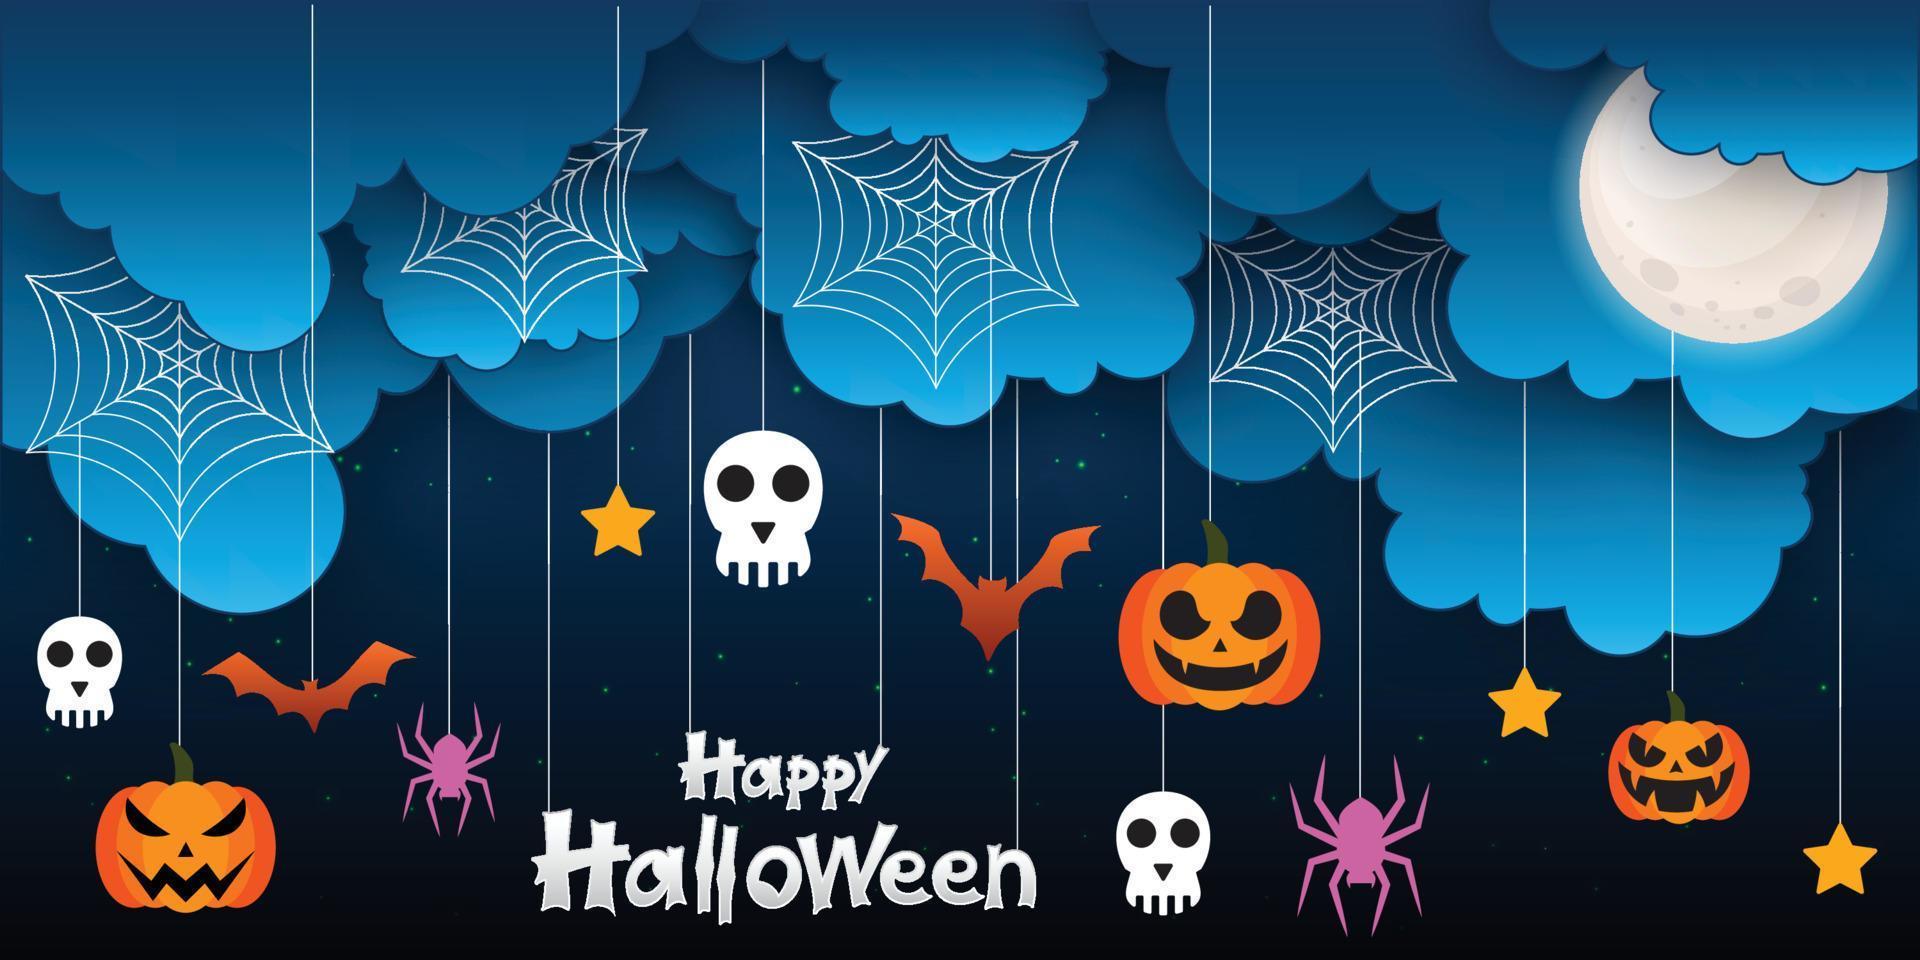 Halloween sale facebook cover page timeline, web ad banner template with pumpkins, bats and cloud on orange background Modern layout concept design vector